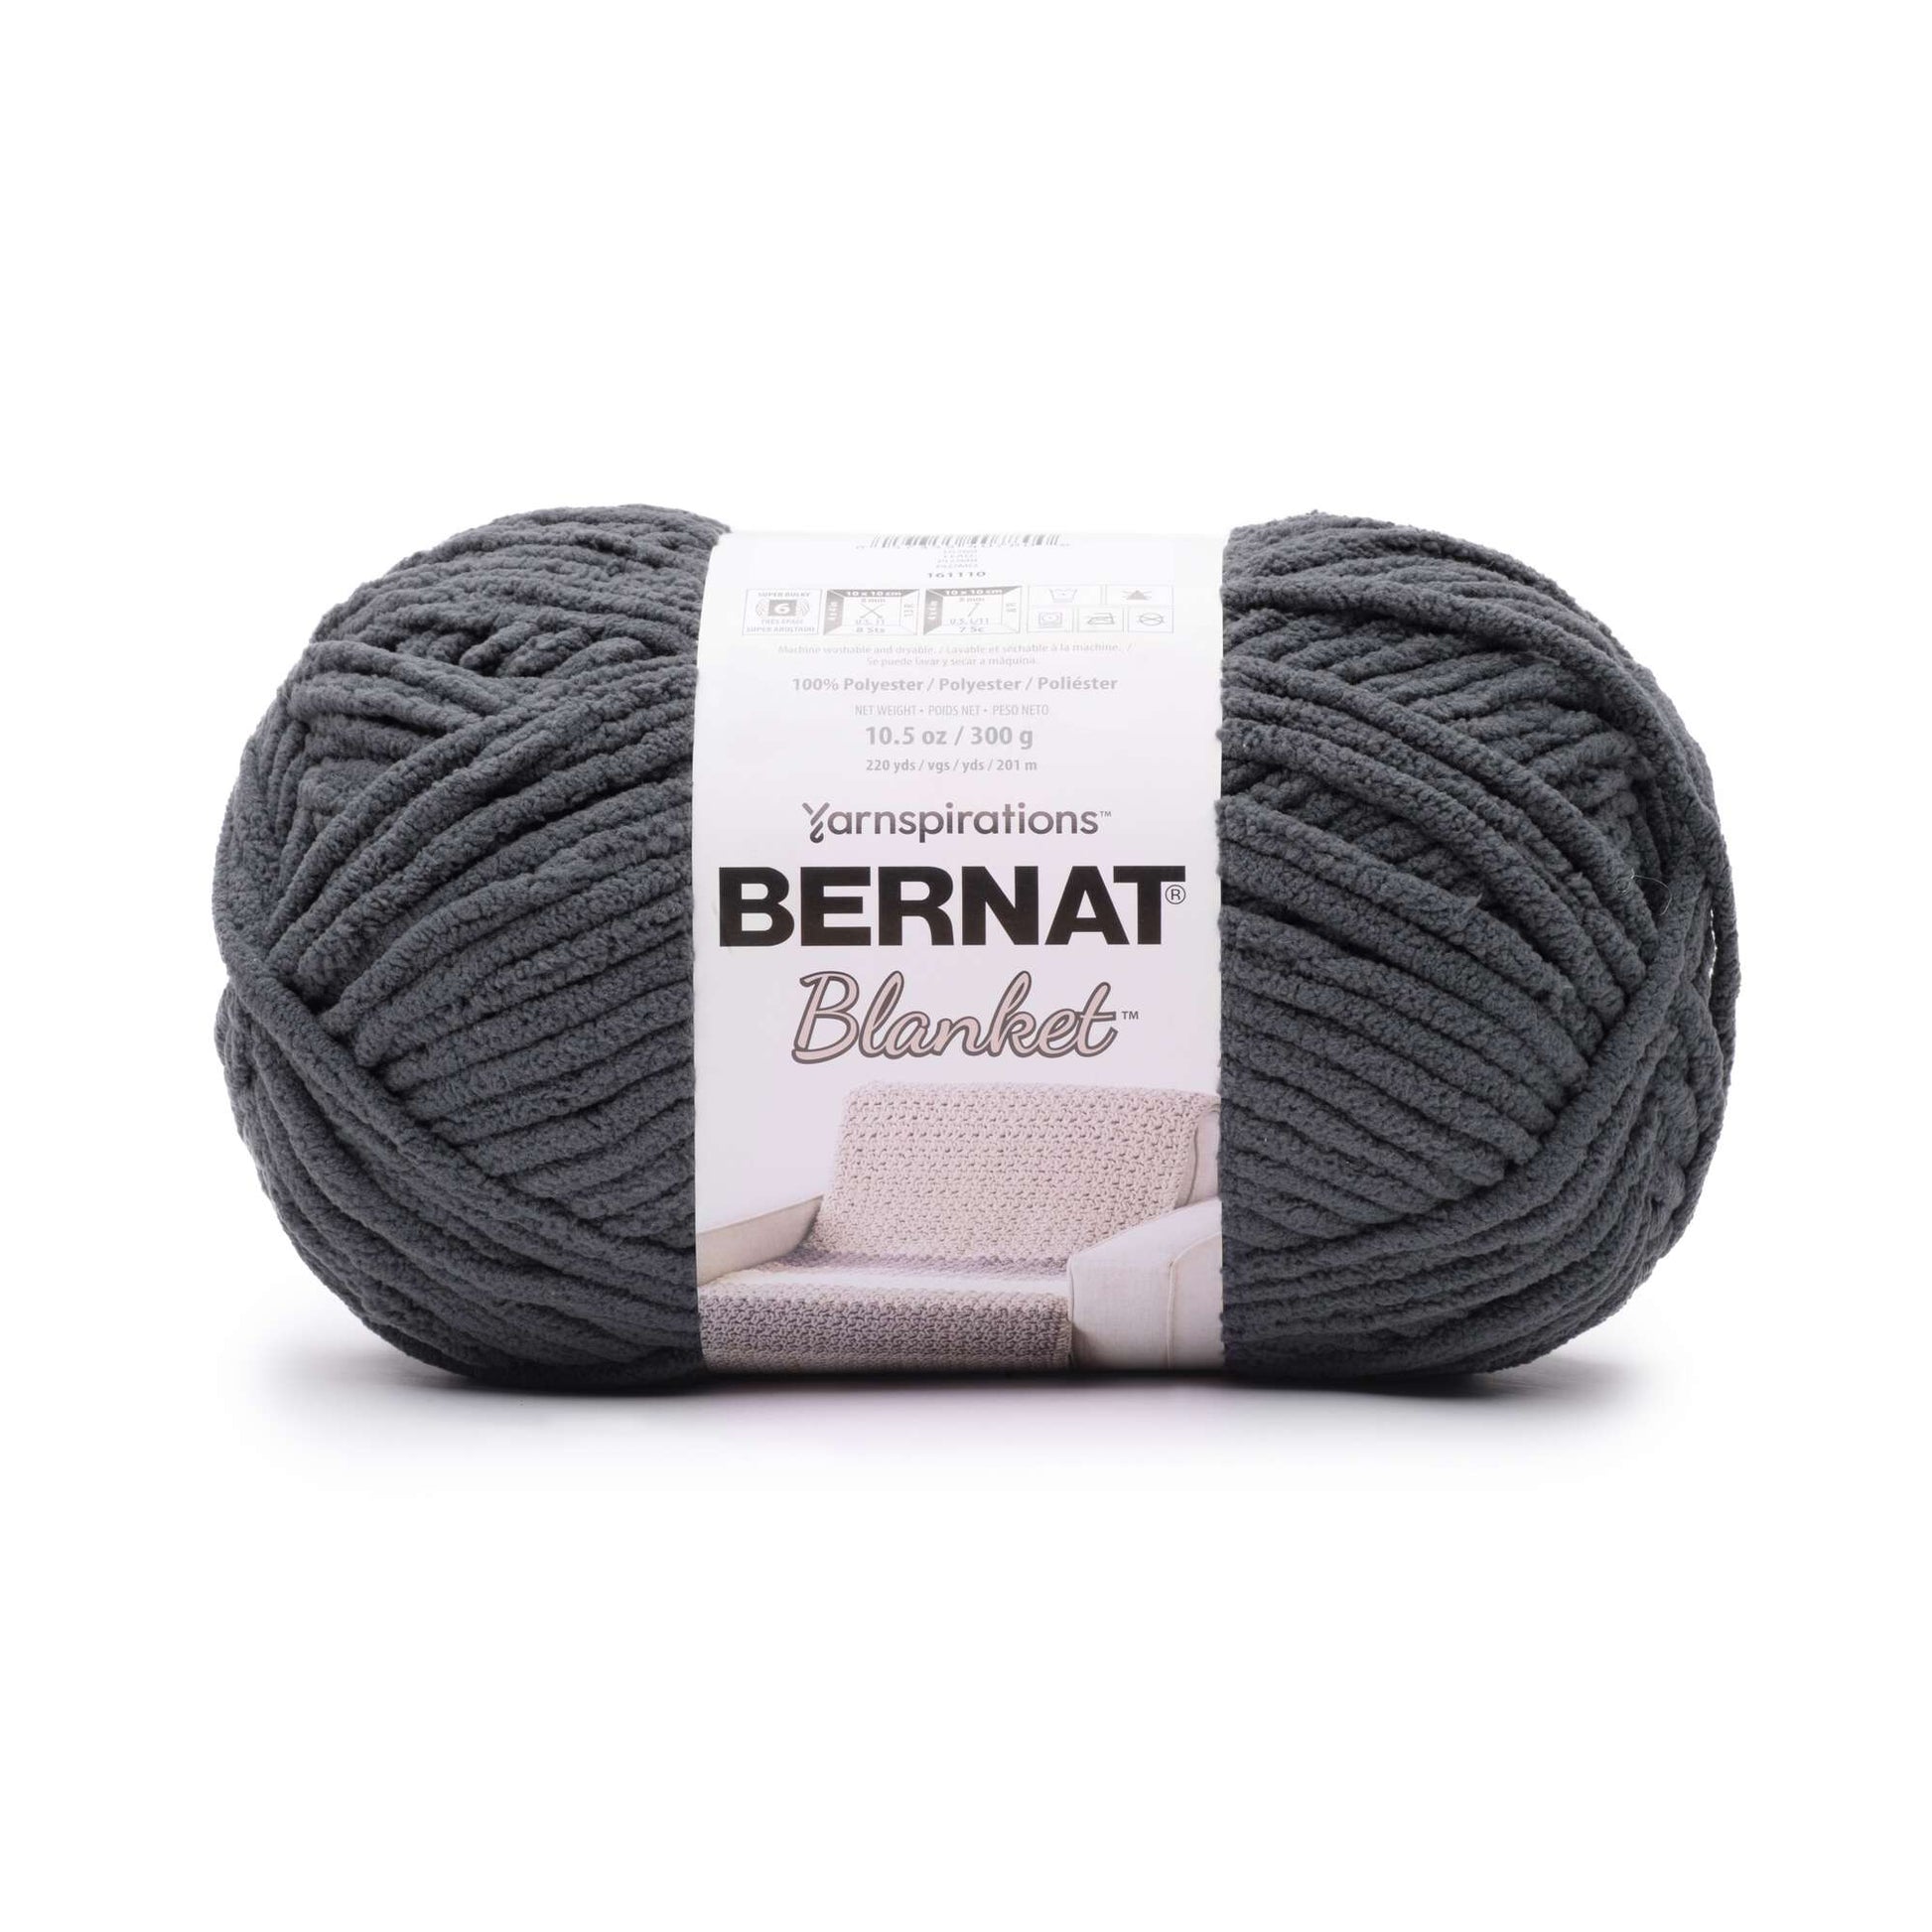 Manufacturer states Bernat Blanket yarn flattened due to packaging and  after washing will fluff back up. Is this the case? : r/crochet